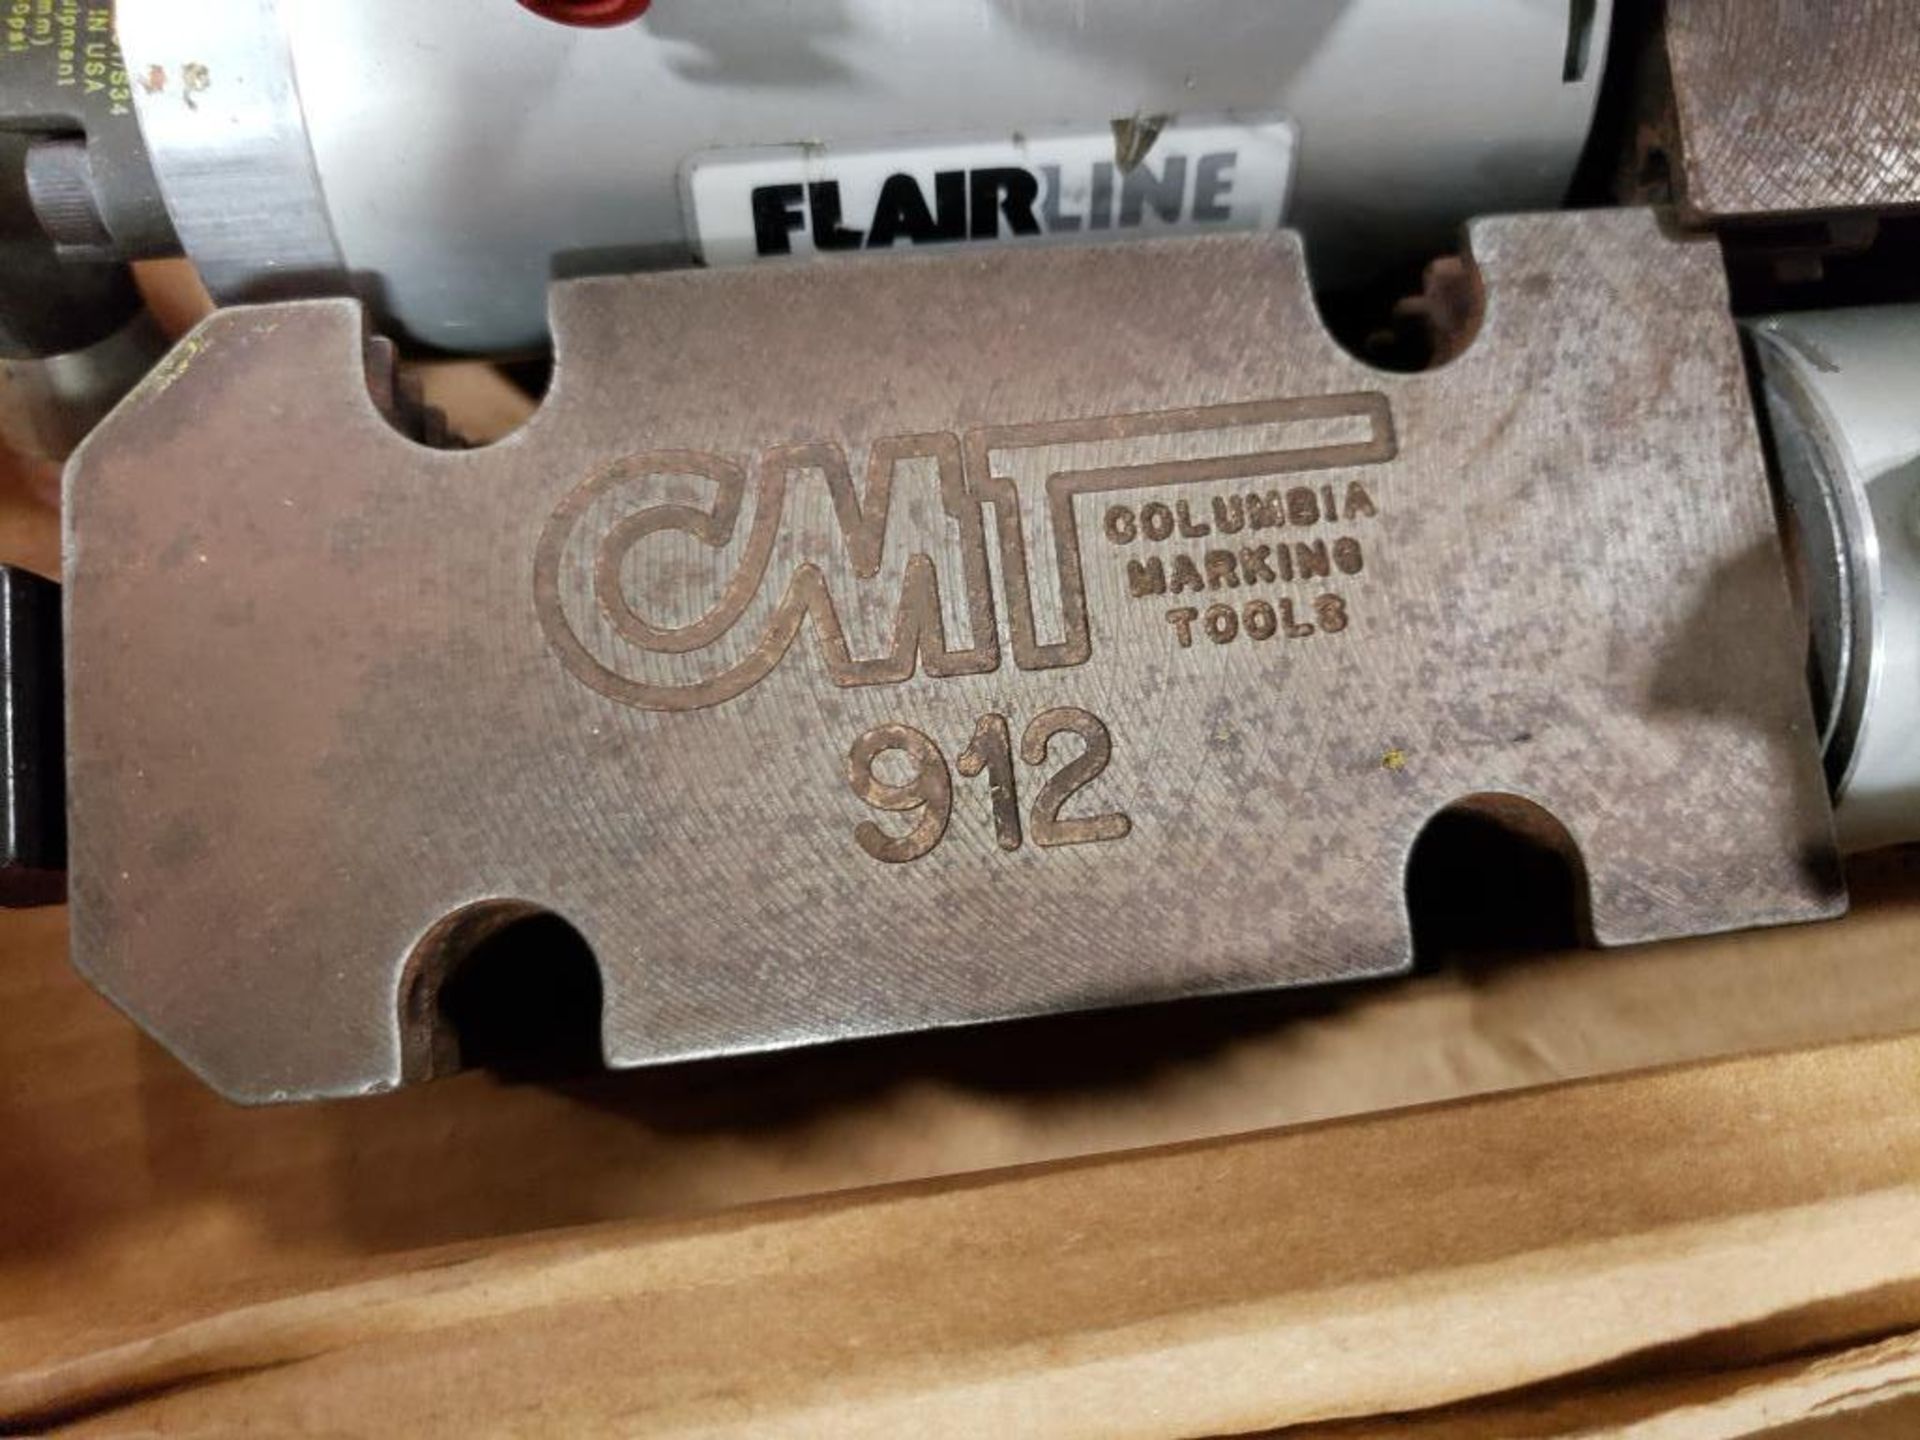 Qty 2 - CMT Columbia Marking Tools 912. - Image 3 of 6